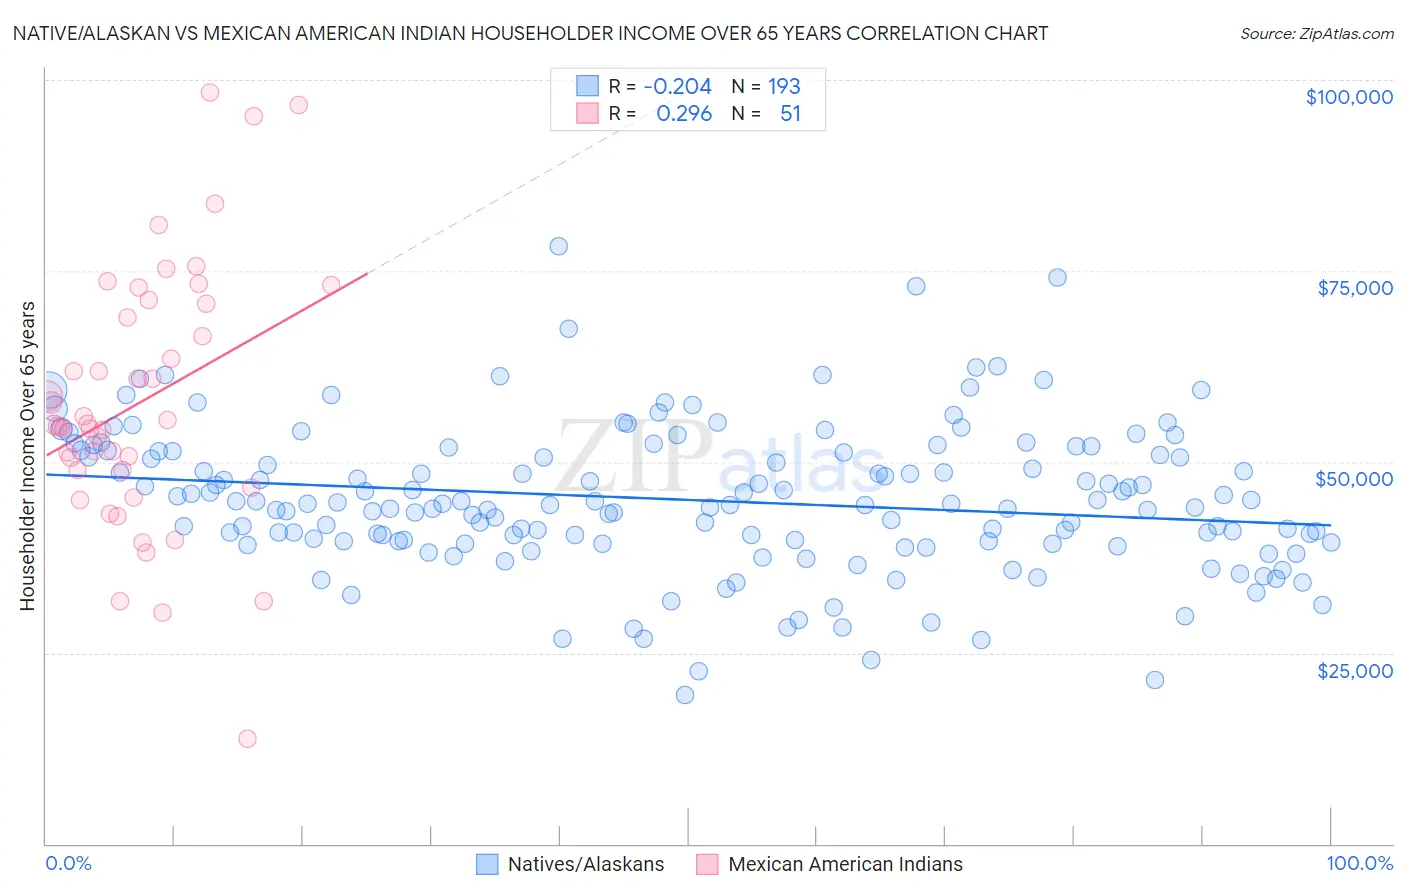 Native/Alaskan vs Mexican American Indian Householder Income Over 65 years